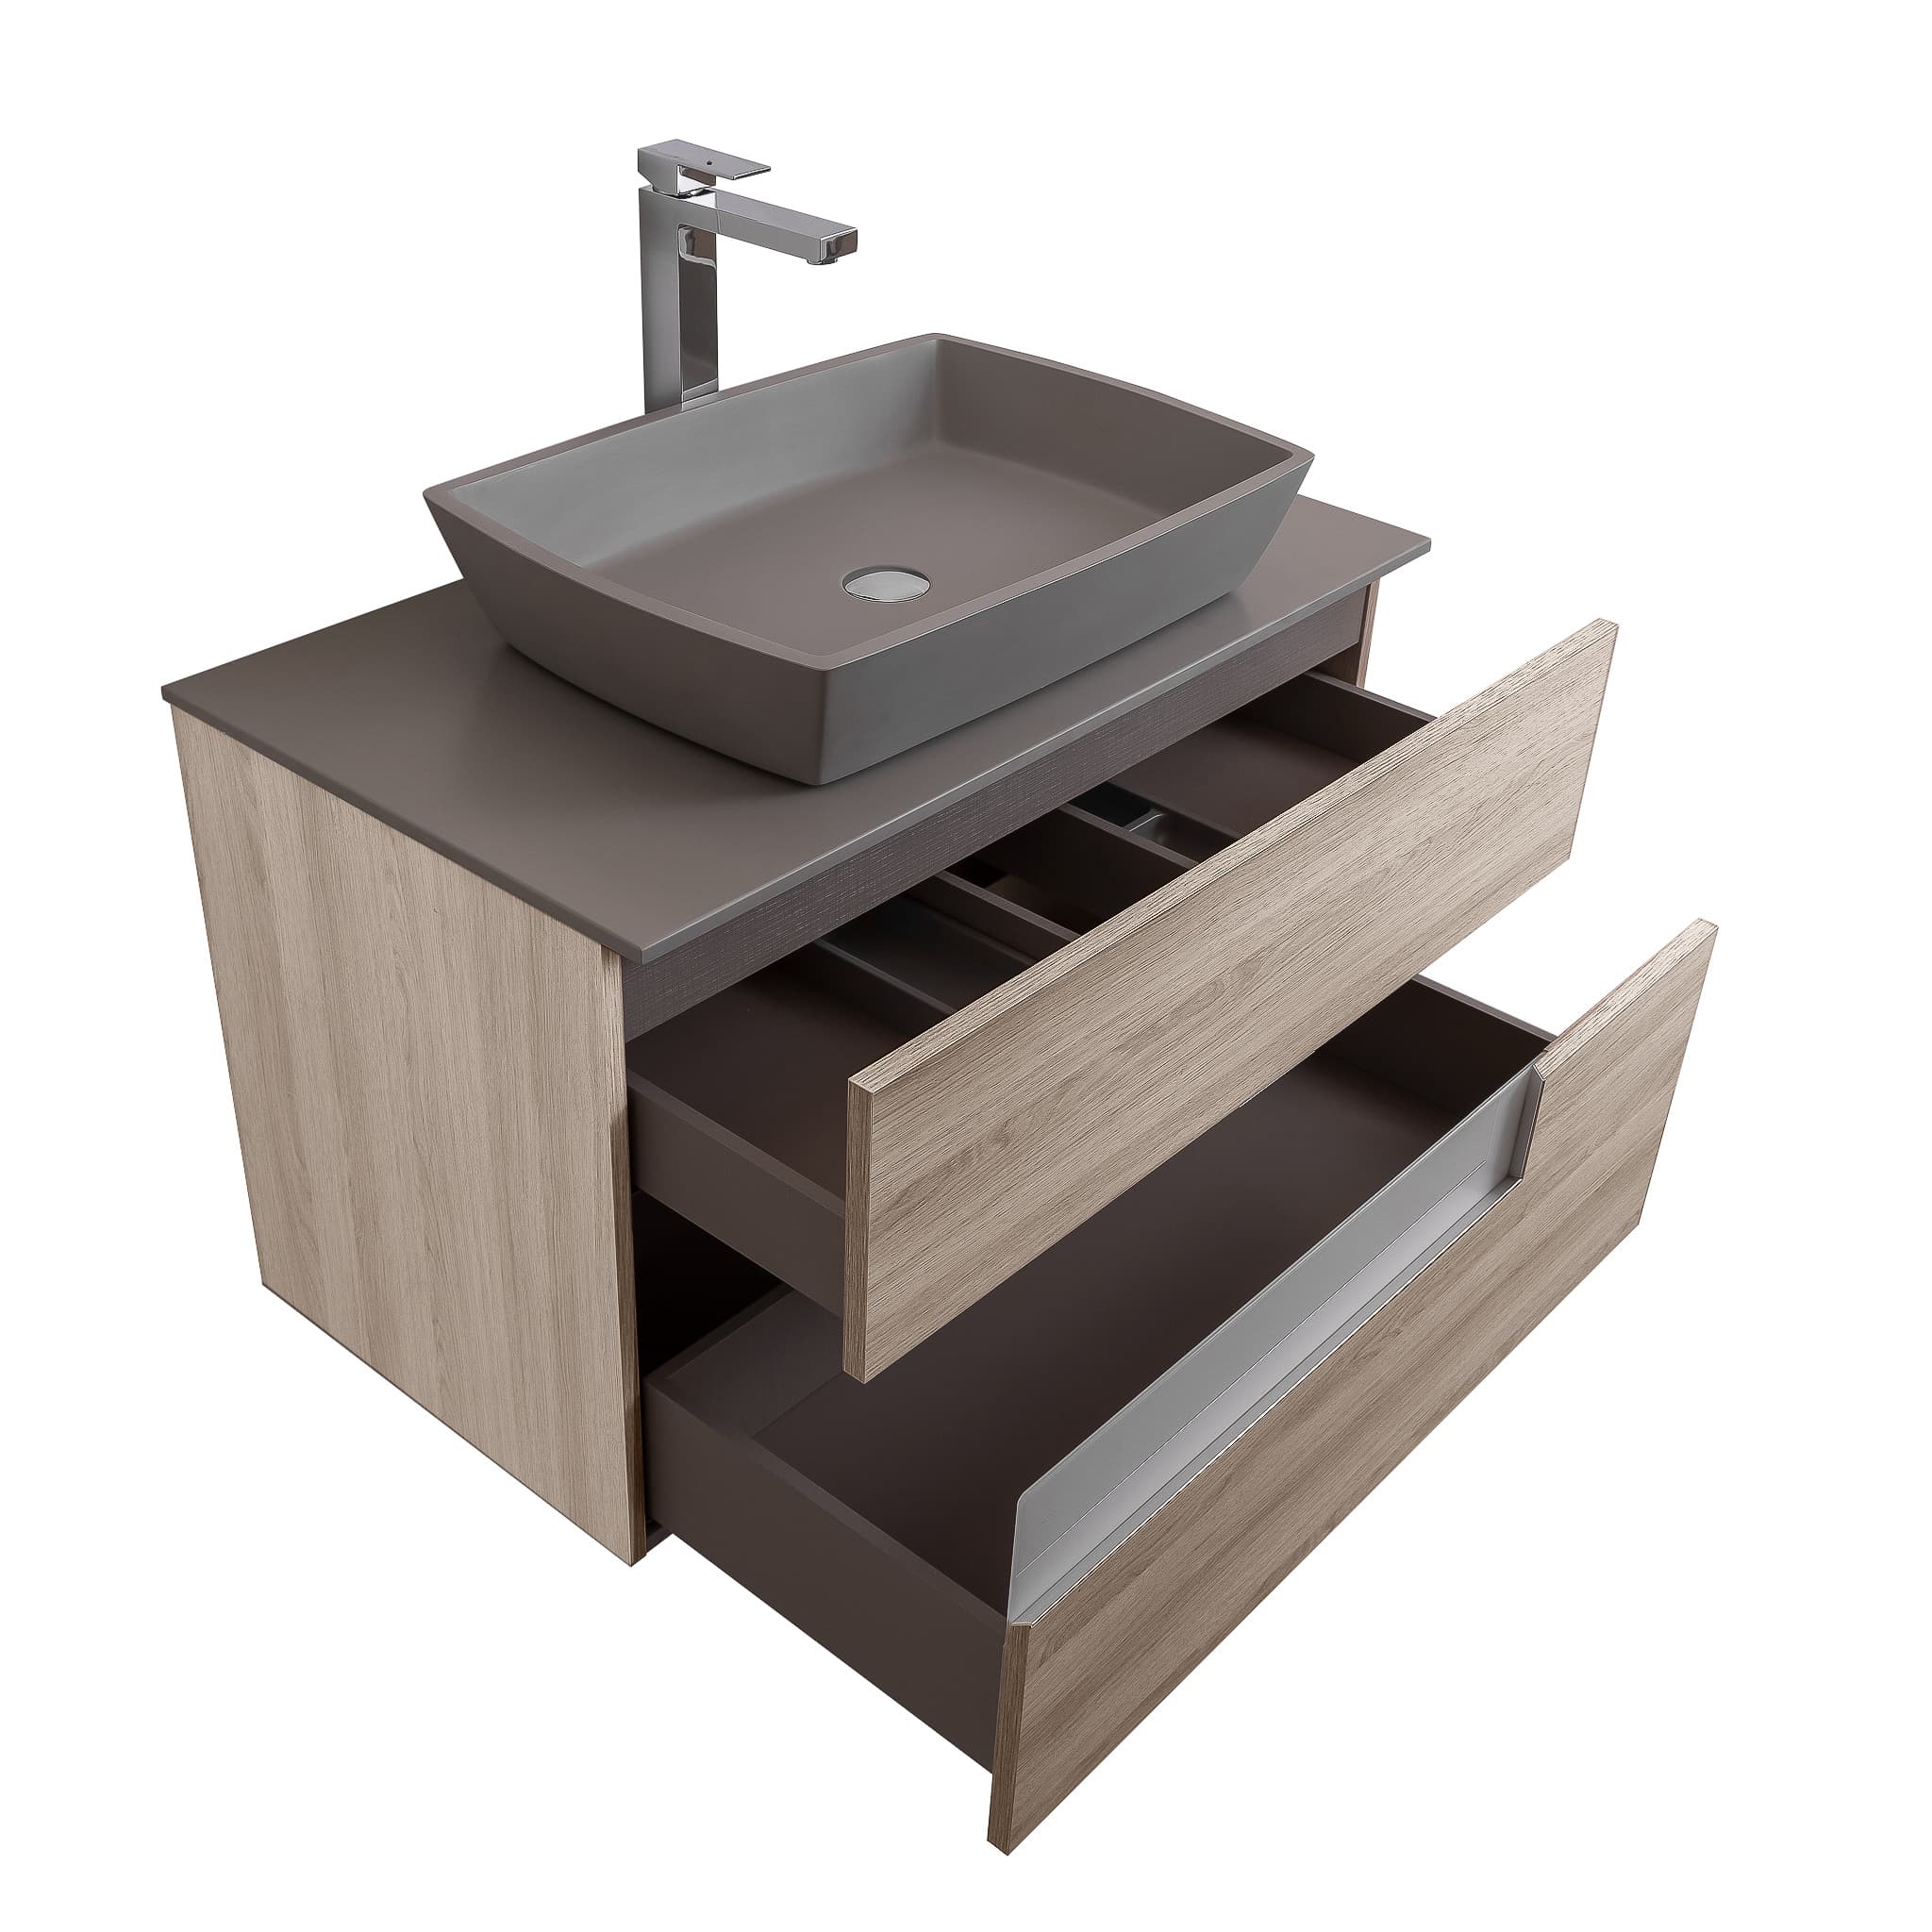 Vision 31.5 Natural Light Wood Cabinet, Solid Surface Flat Grey Counter And Square Solid Surface Grey Basin 1316, Wall Mounted Modern Vanity Set